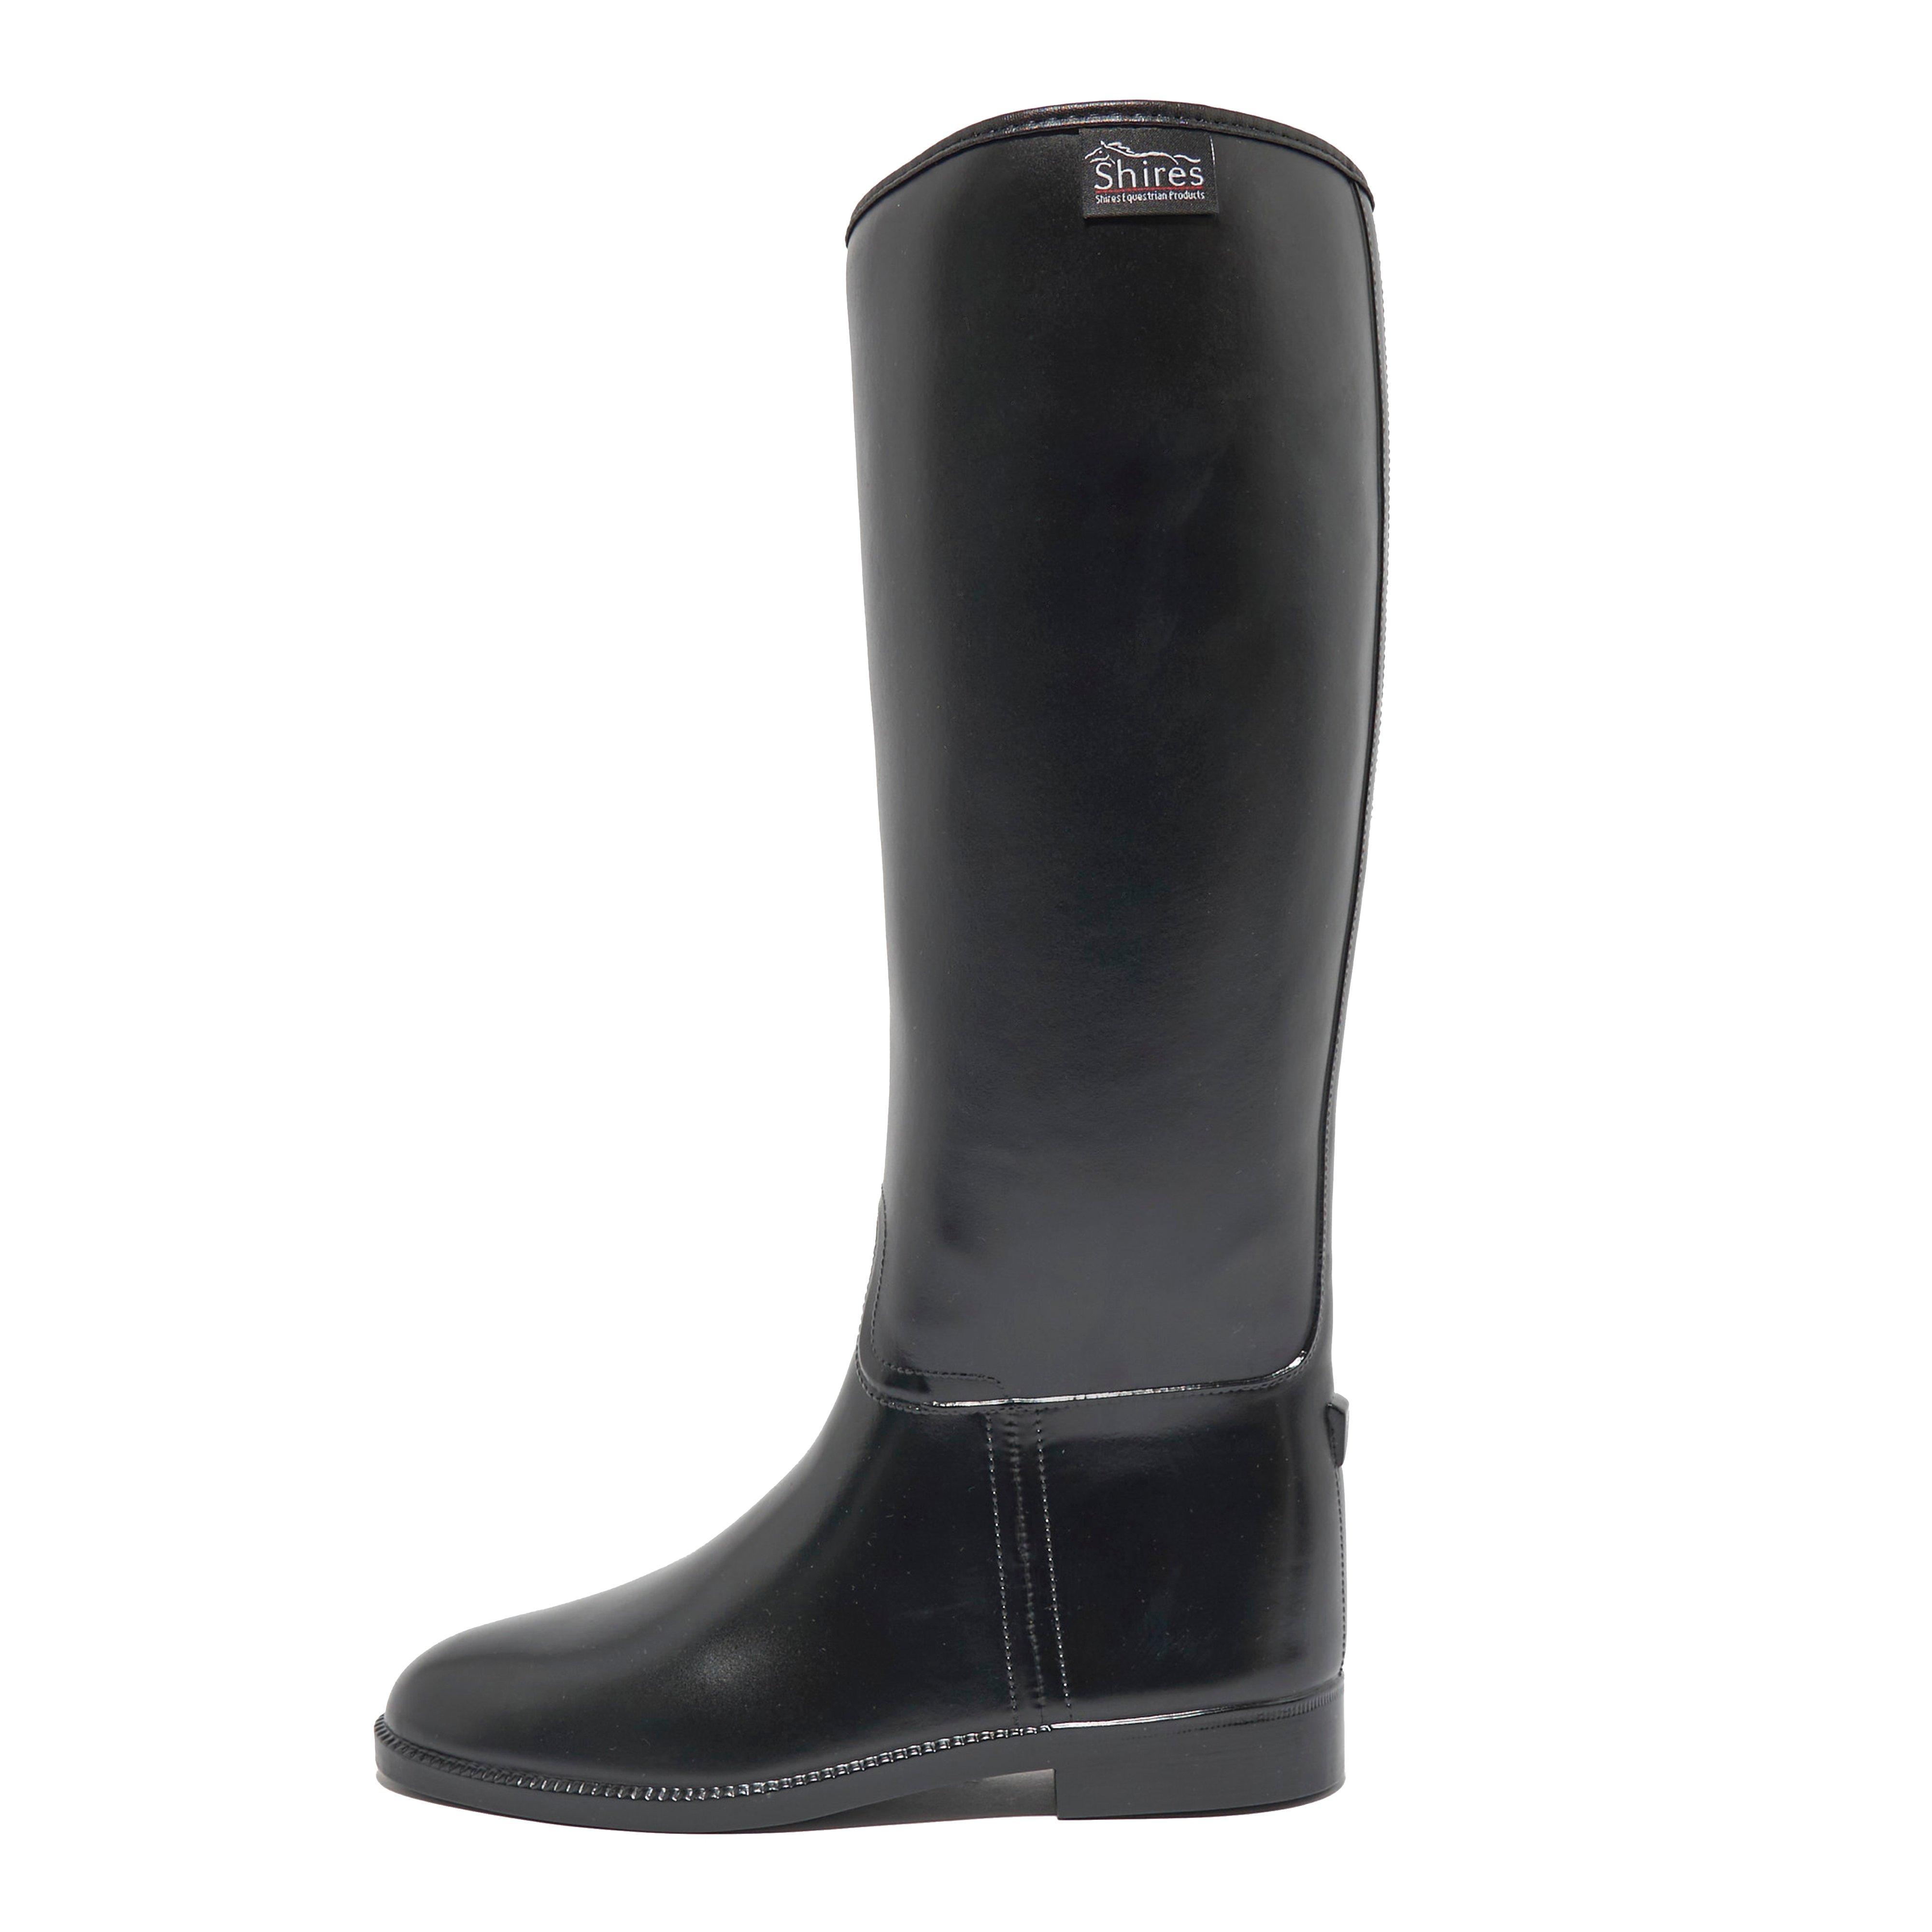 Shires Ladies' Long Rubber Riding Boots (Wide) Review